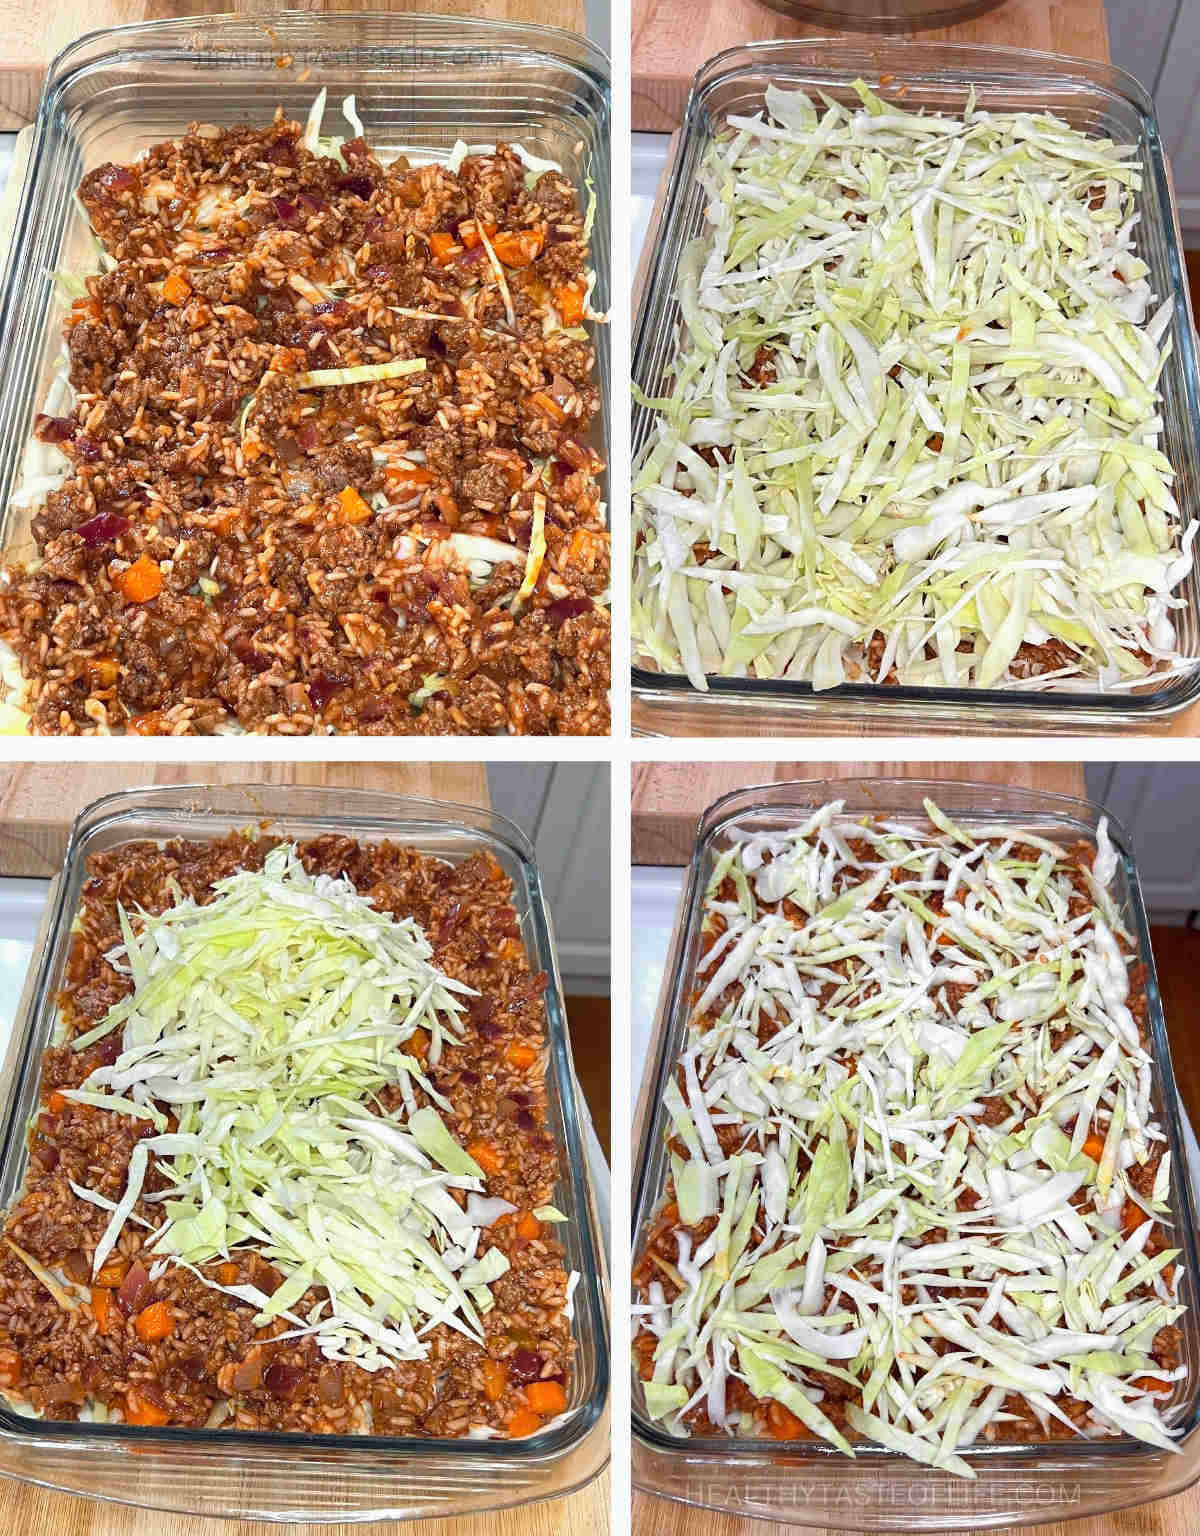 Process shots showing how to assmeble the unstuffed lazy cabbage roll casserole and how to layer the cabbage, beef, rice and tomato sauce in the baking dish.